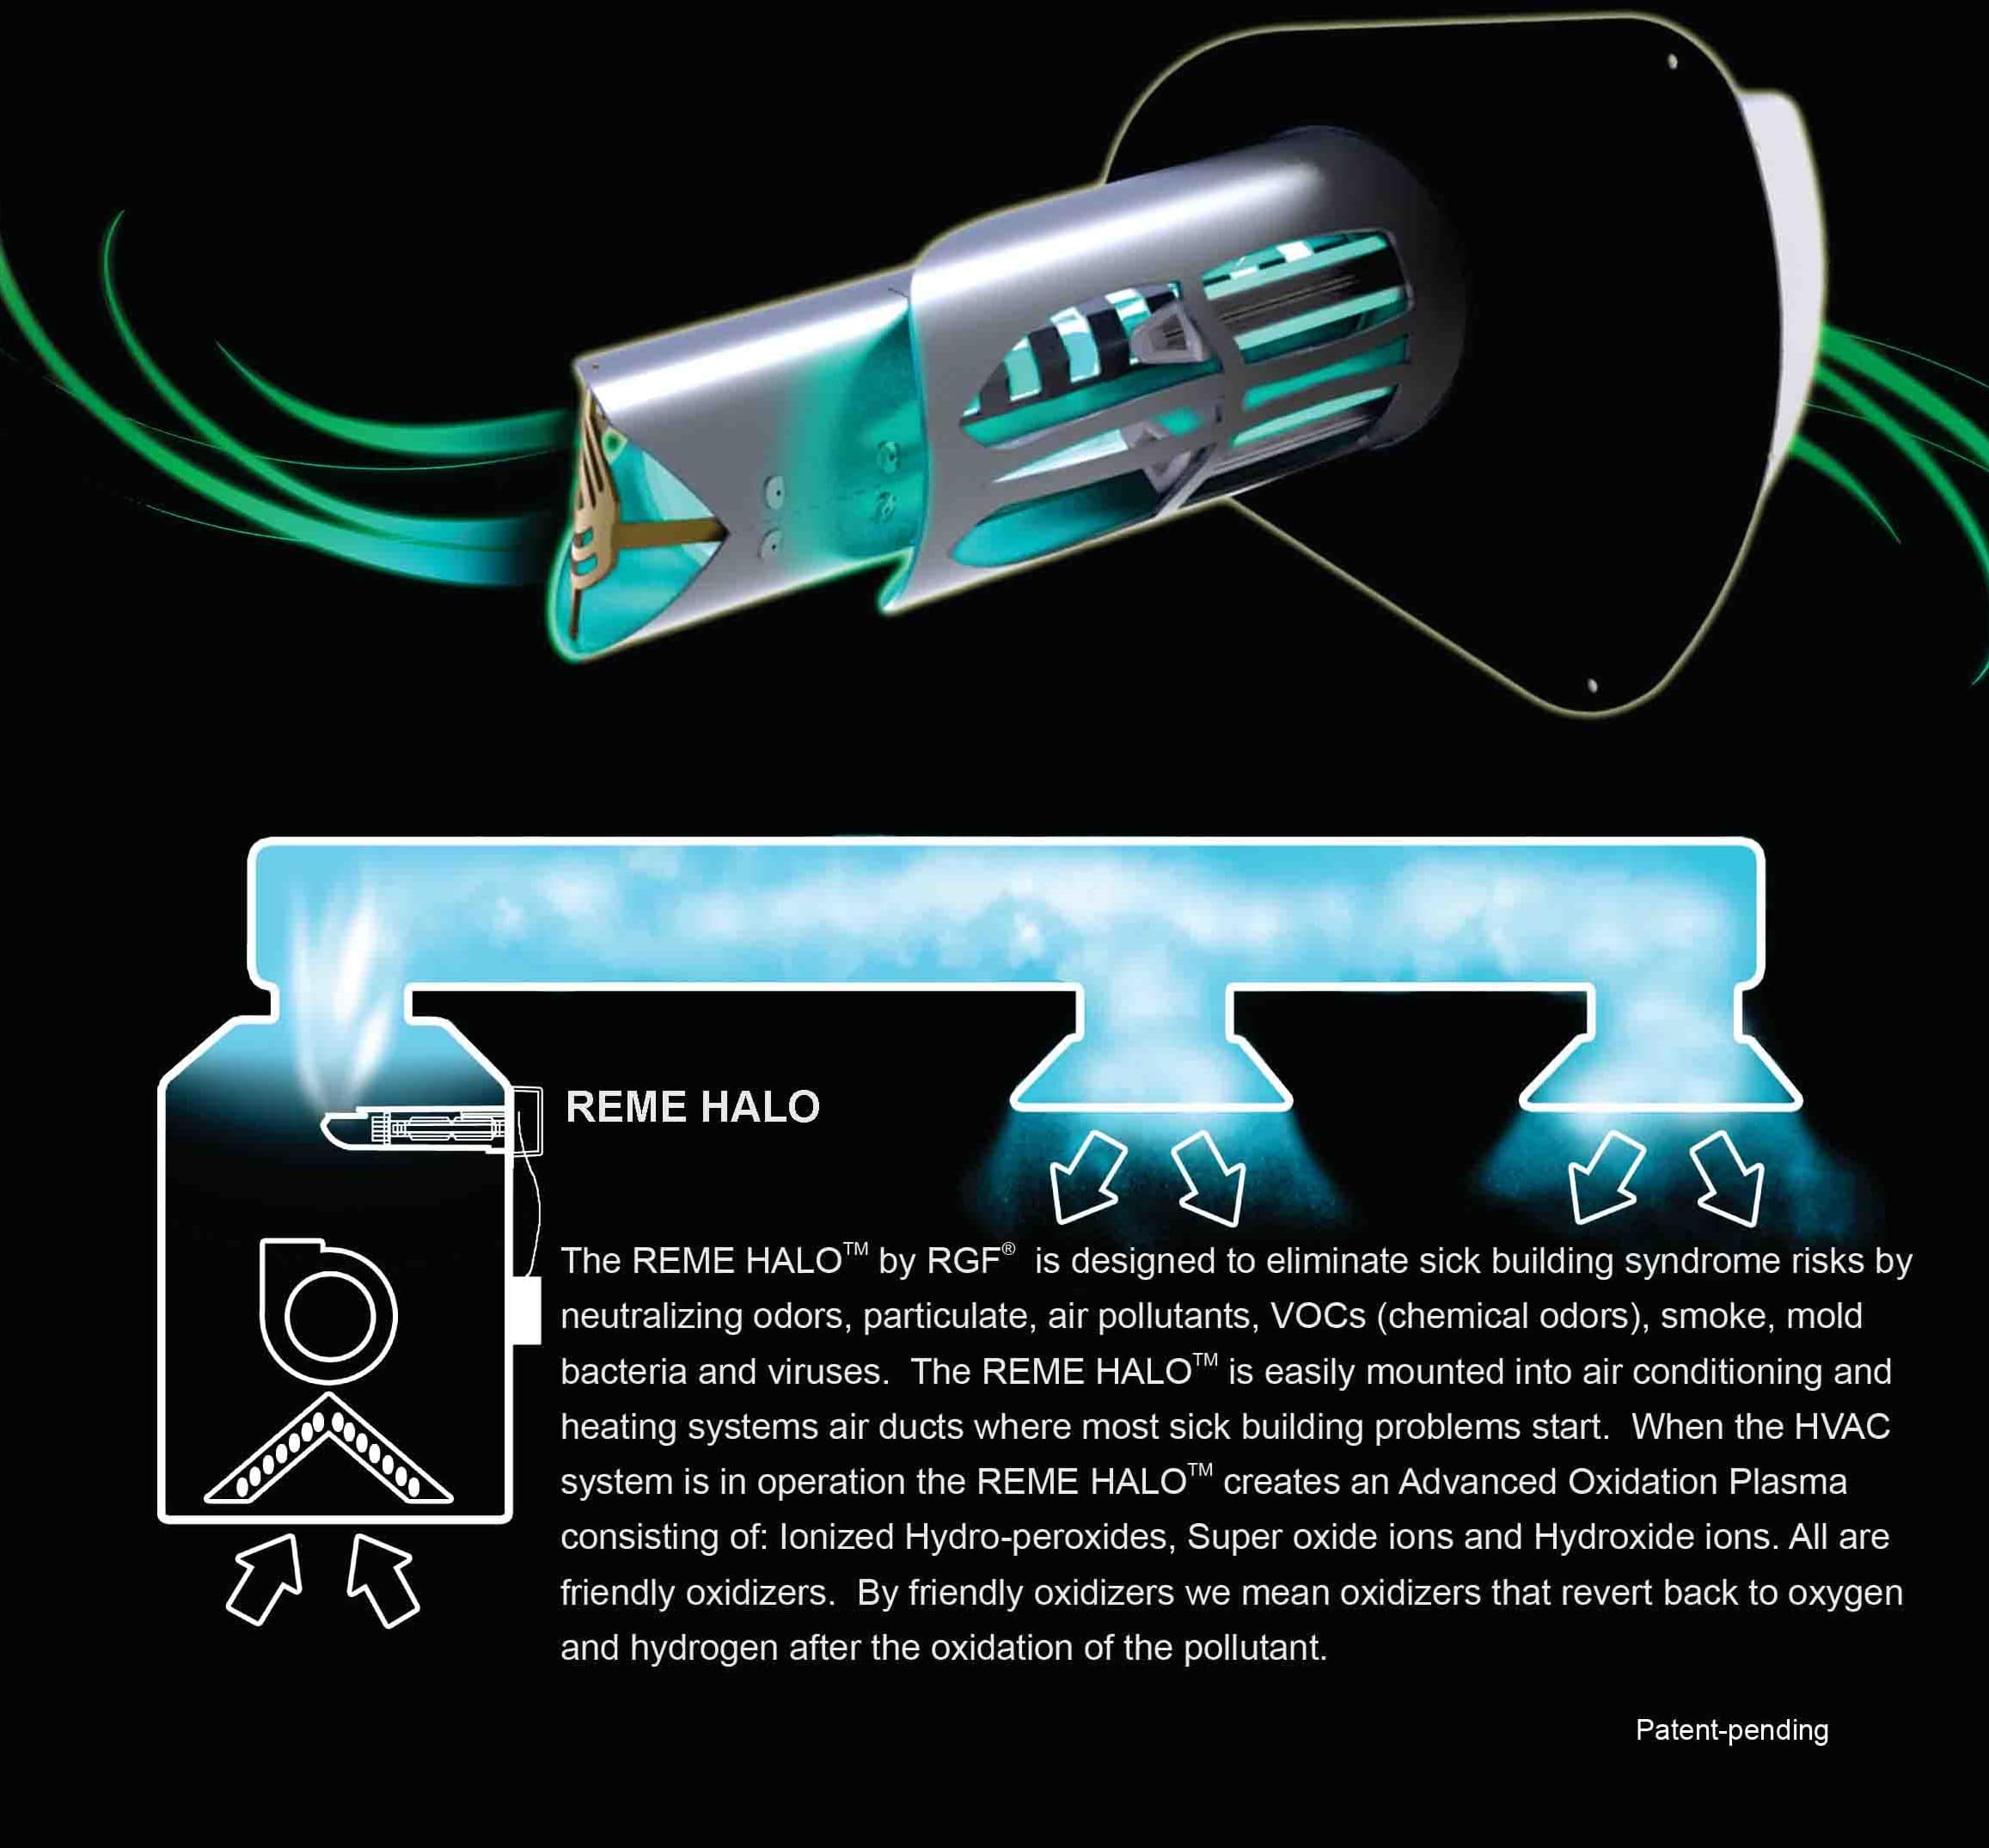 Reme Halo Air Purification in Periodontist Office in Periodontist Office Description